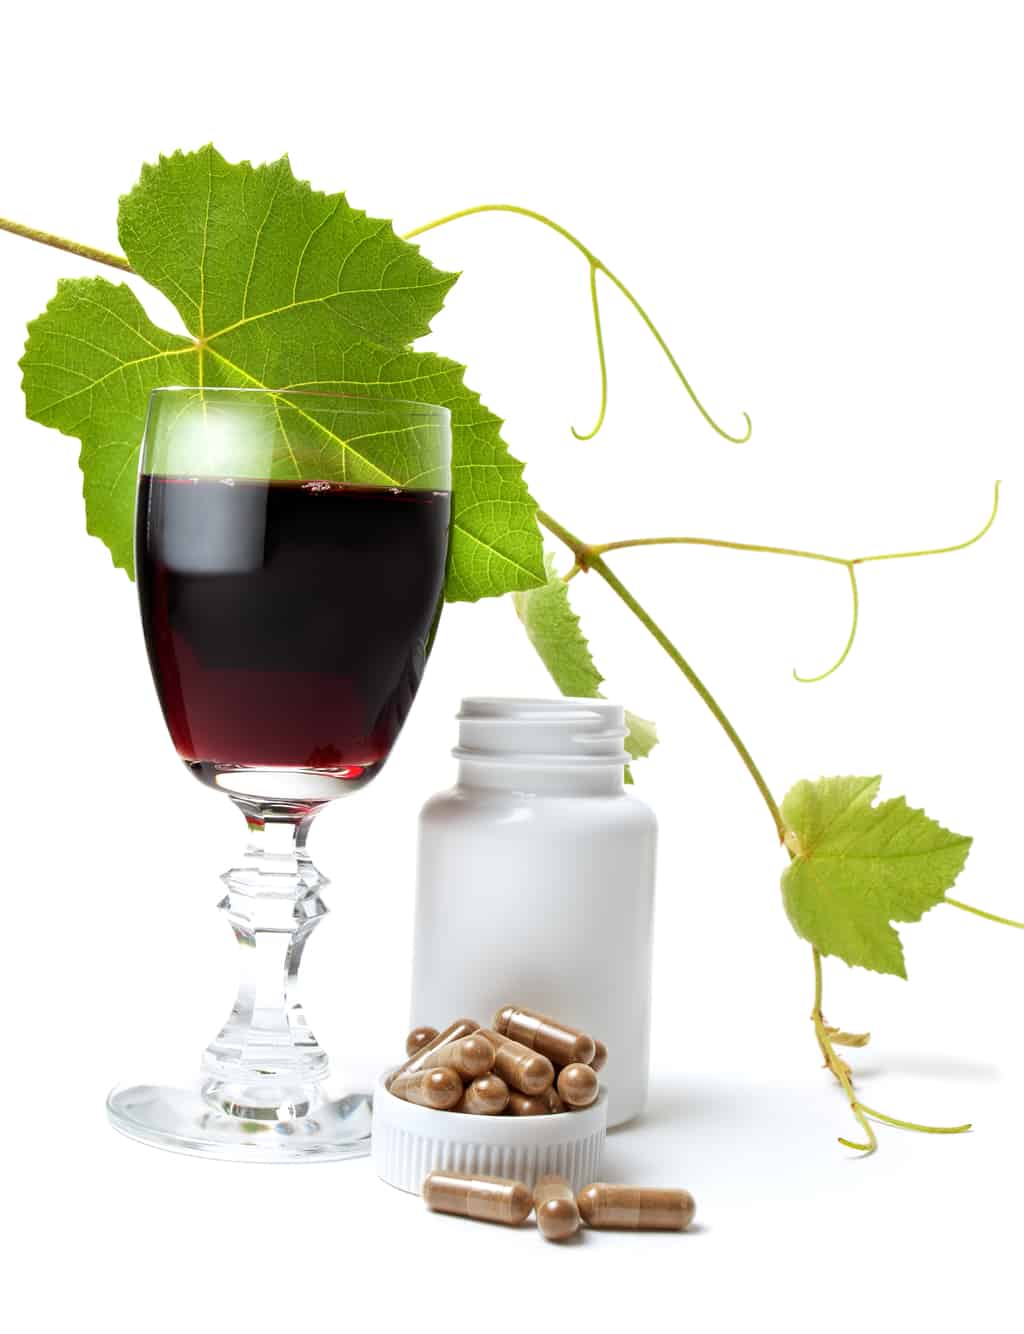 Resveratrol? Is all the hype true?